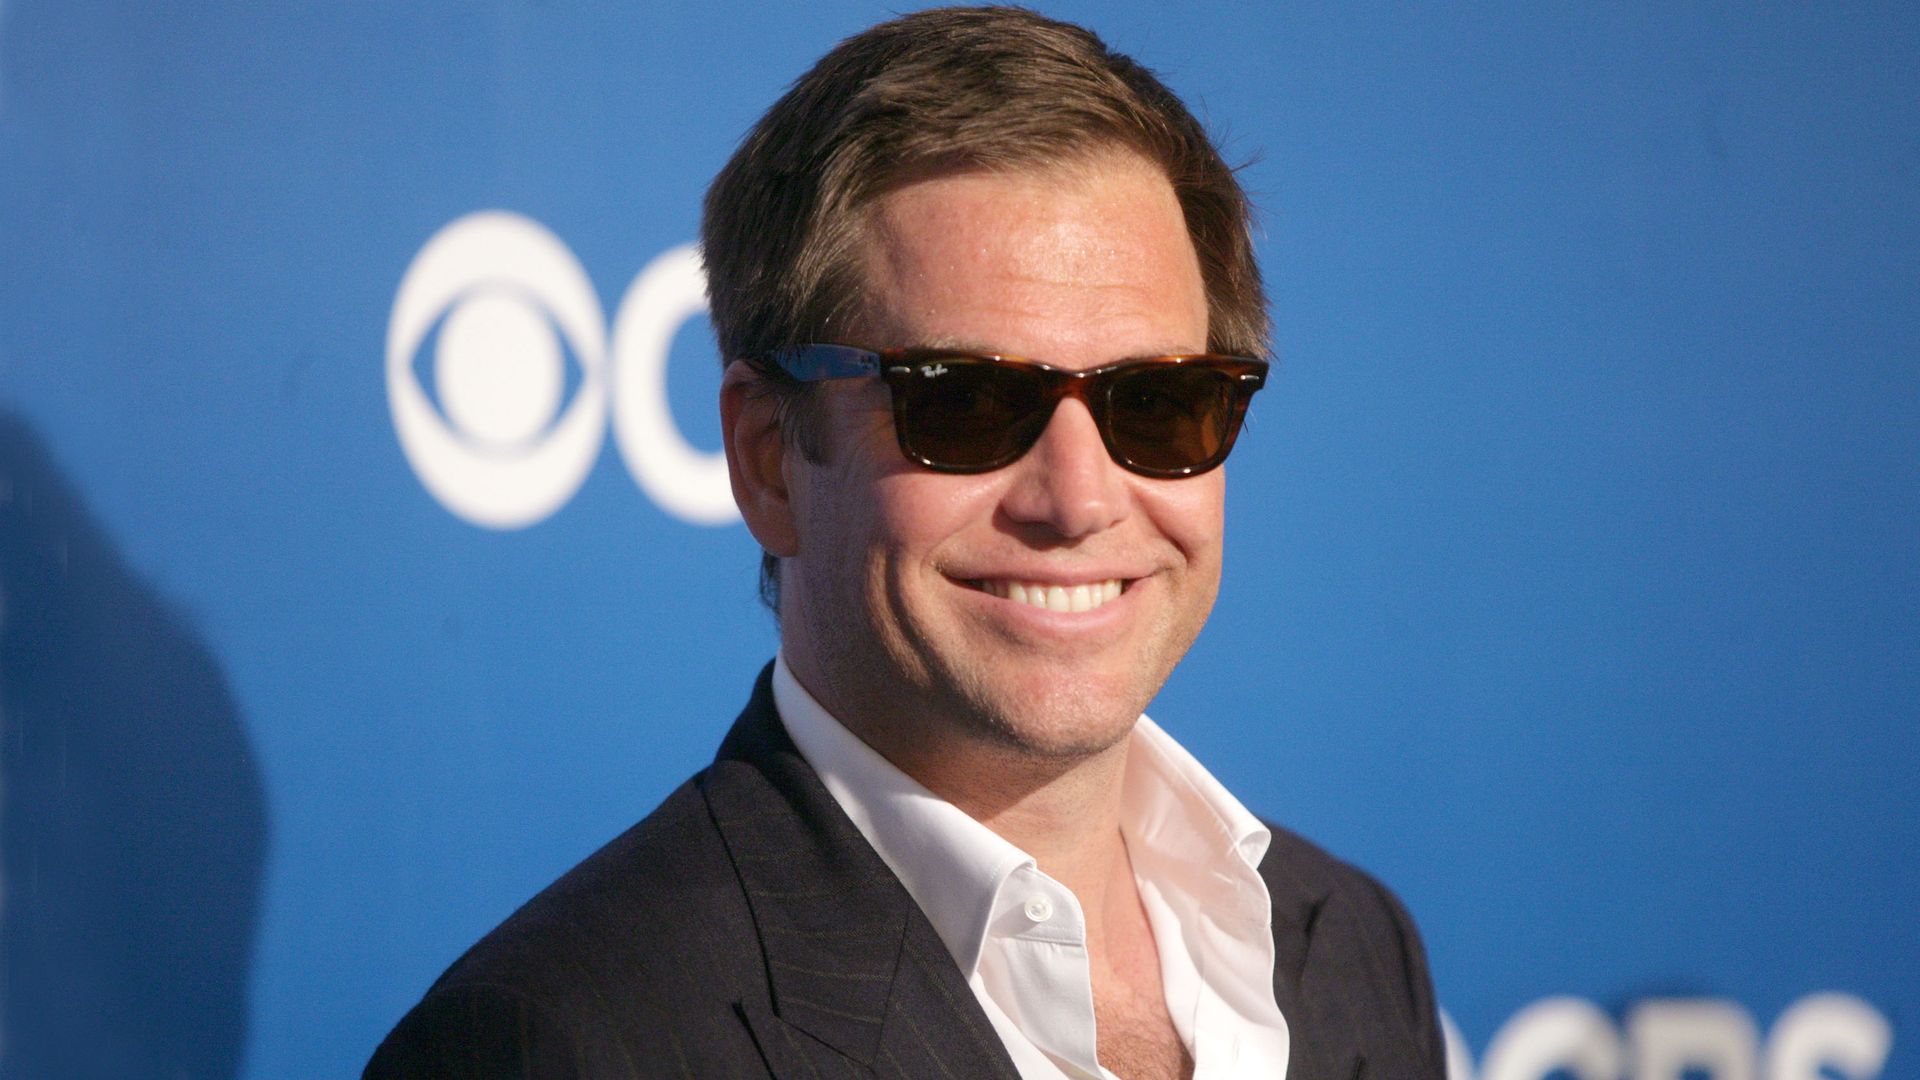 NCIS star Michael Weatherly's forgotten romance with Rod Stewart's ex – details